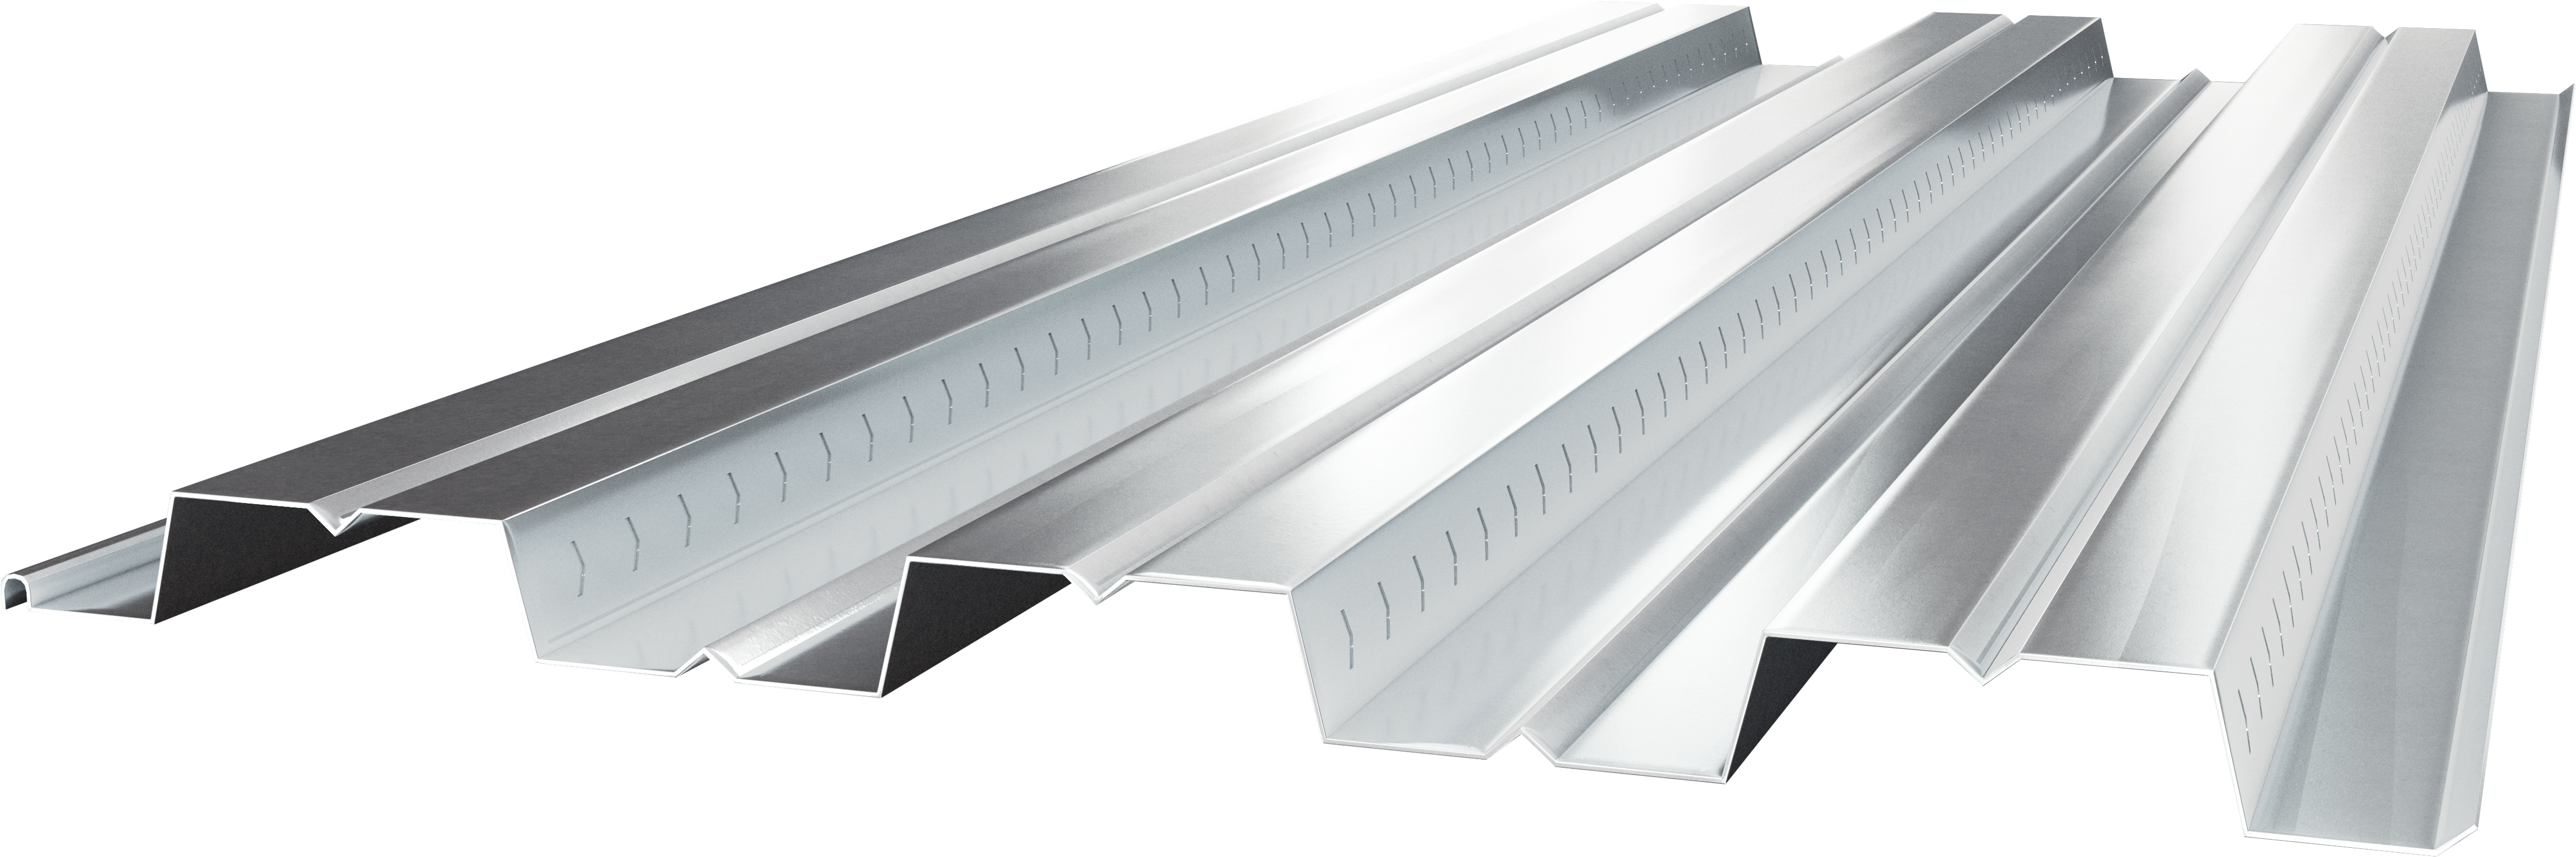 Cordeck Metal Roof Deck Products